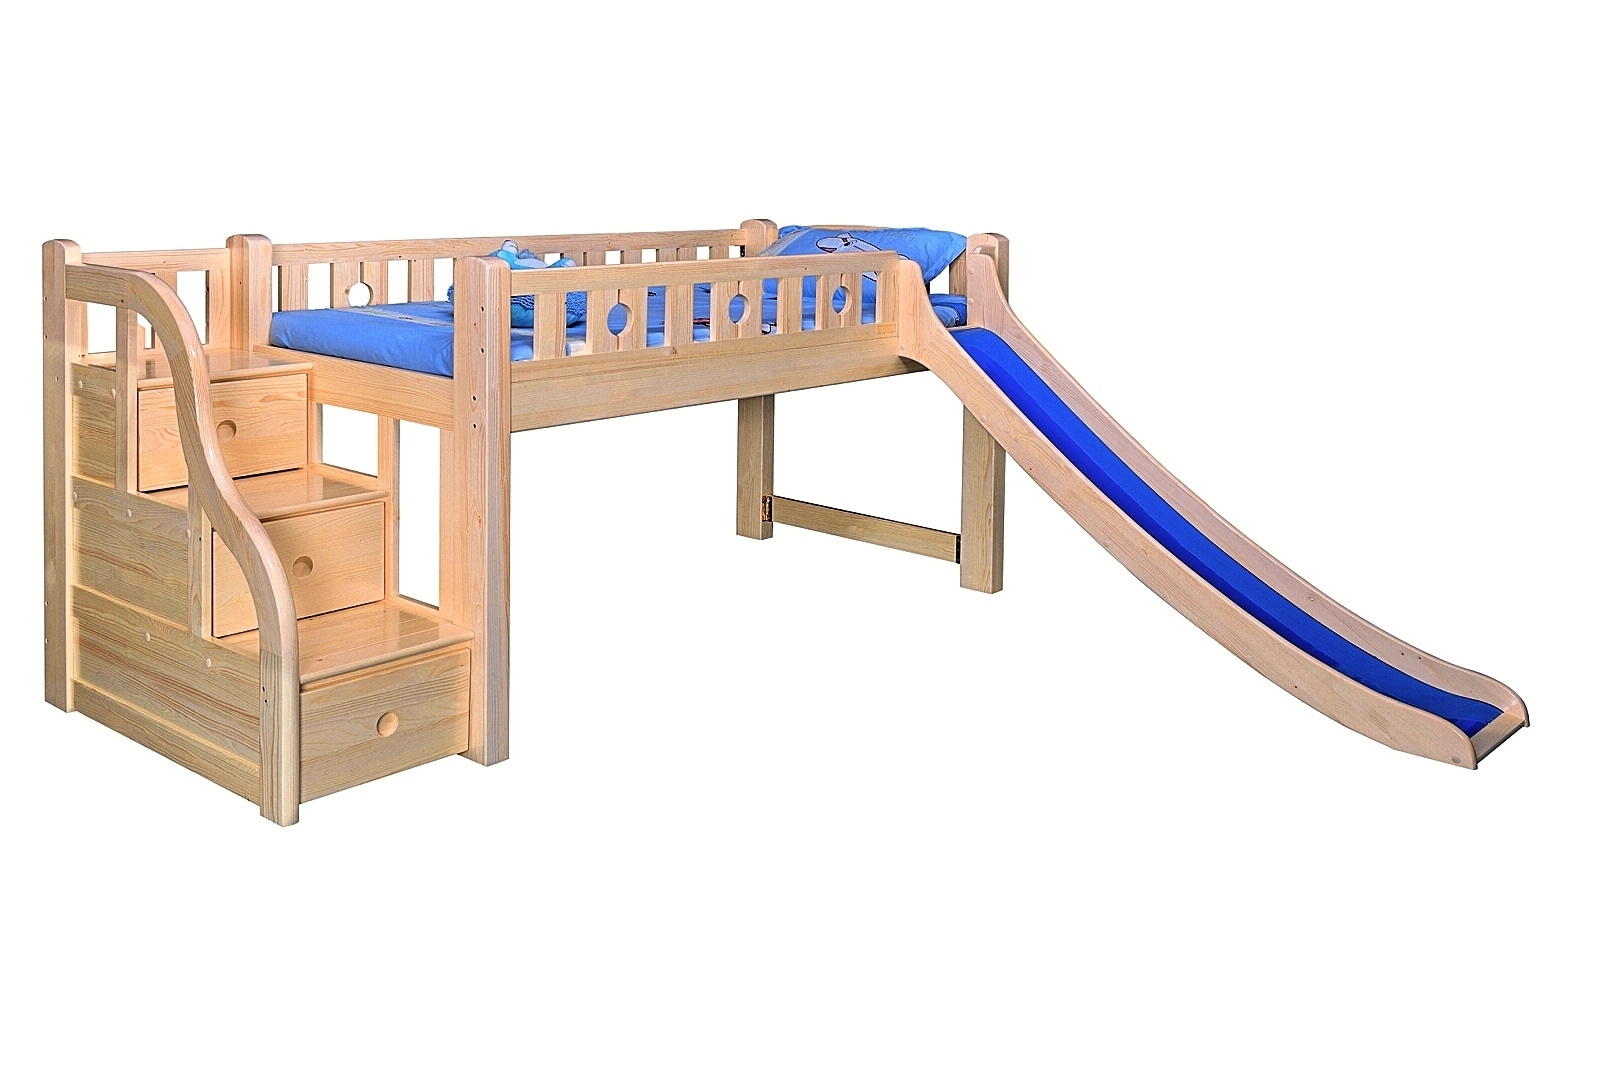 Timber Bunk Bed With Blue Slide, Bunk Beds Australia